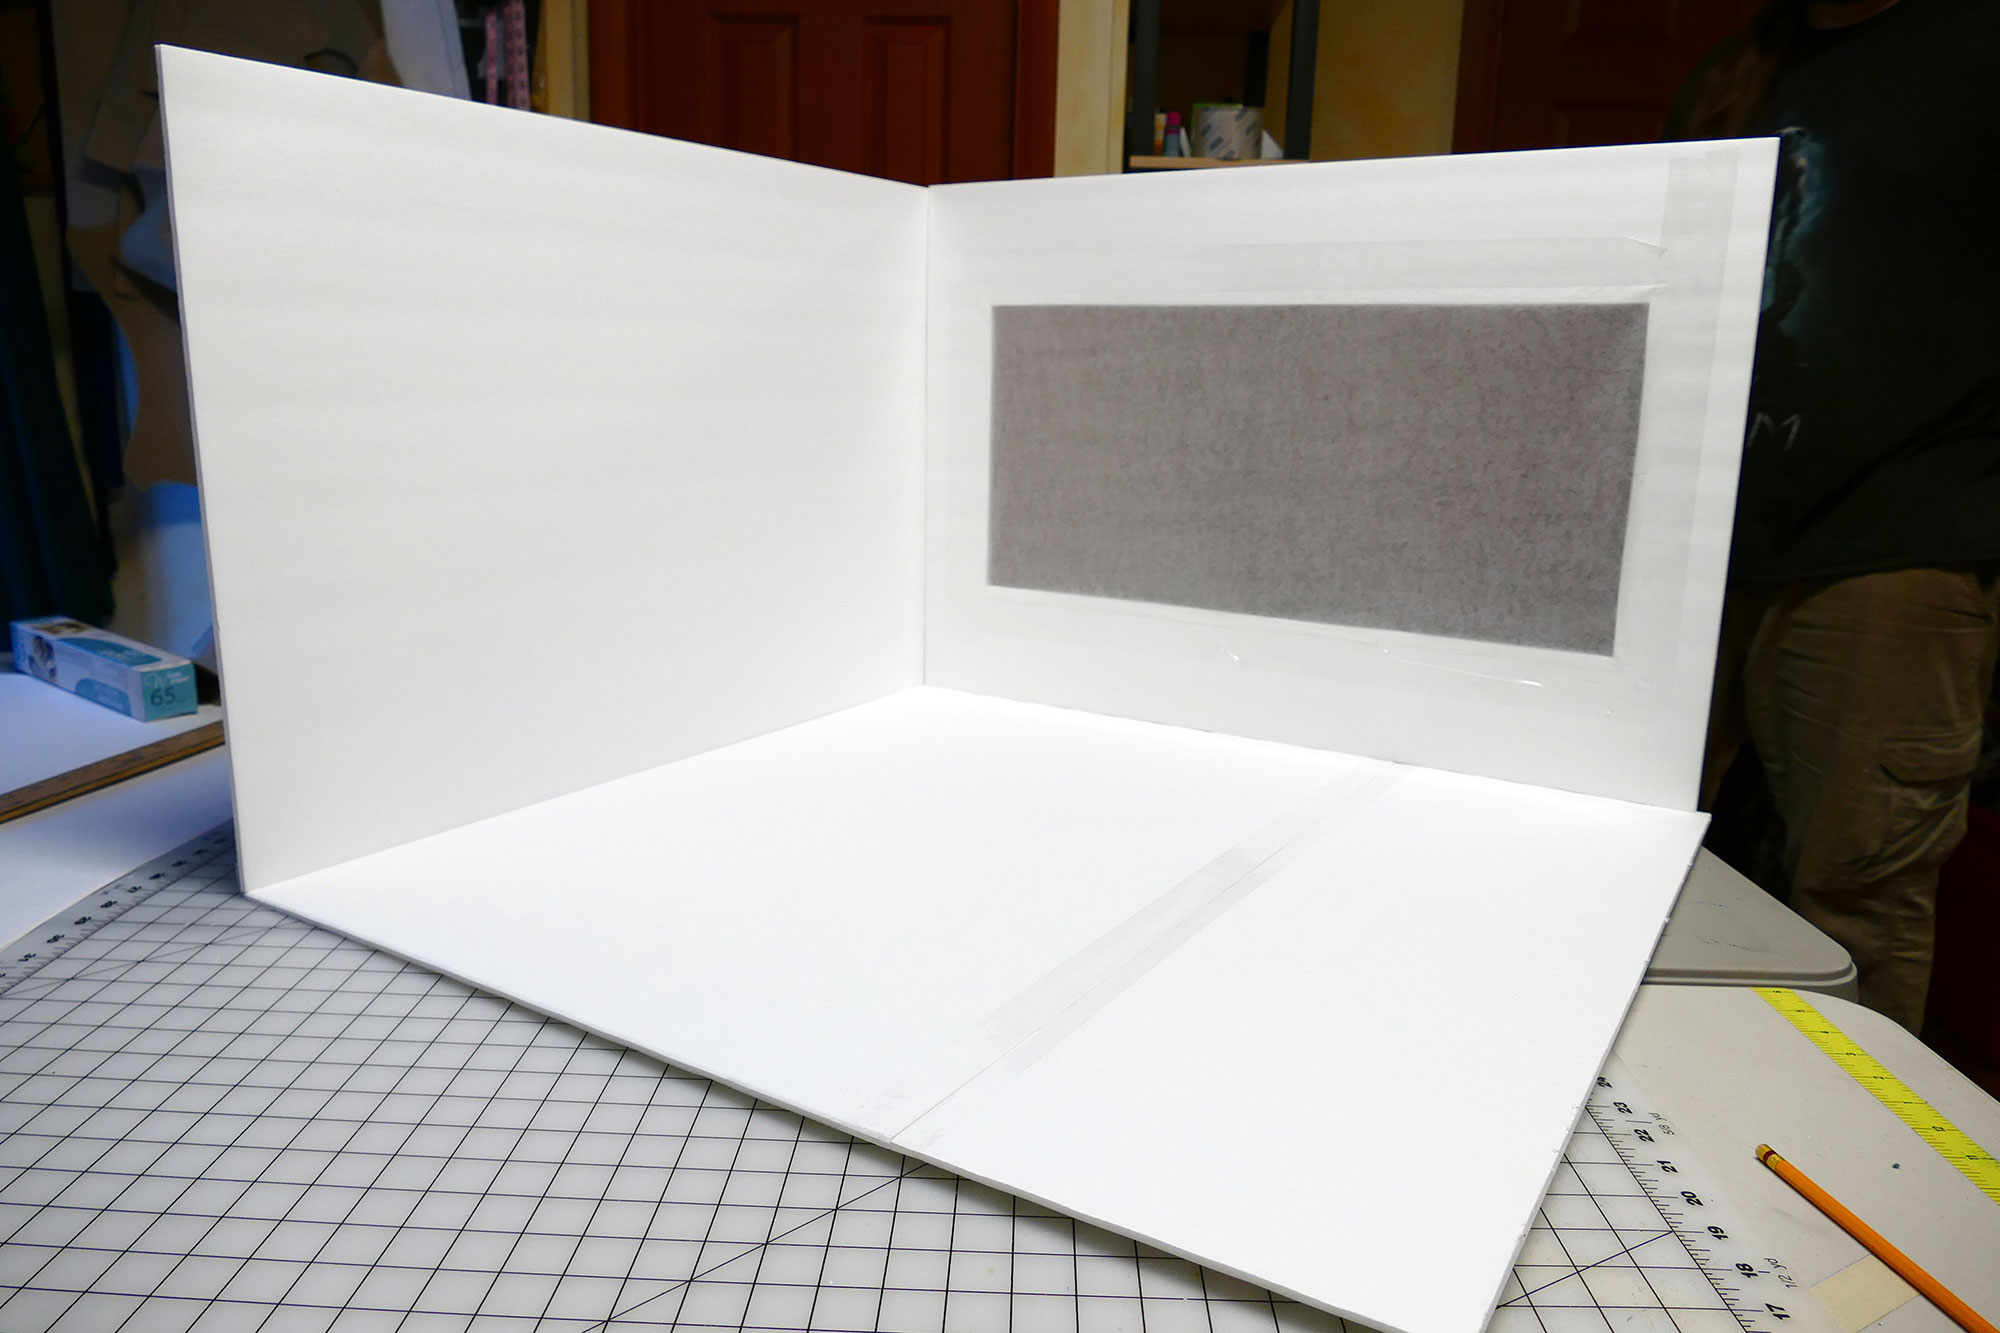 HOW TO: Make Your Own Lightbox